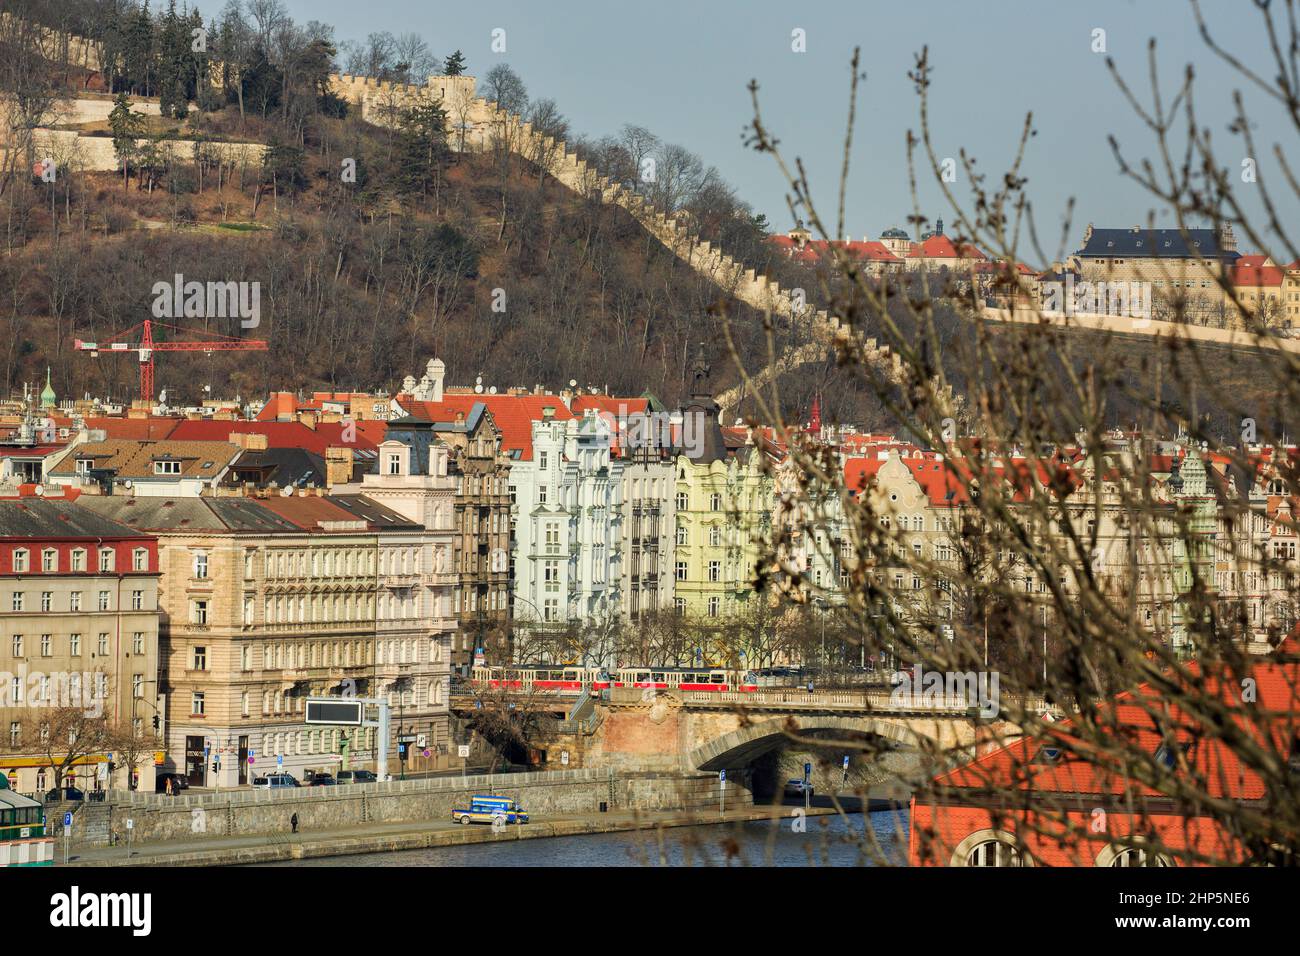 Castellations of the castle wall on Petrin Hill, Hradcany, Prague, Czech republic, viewed from Vysehrad Fortress, with River Vltava a red train below Stock Photo